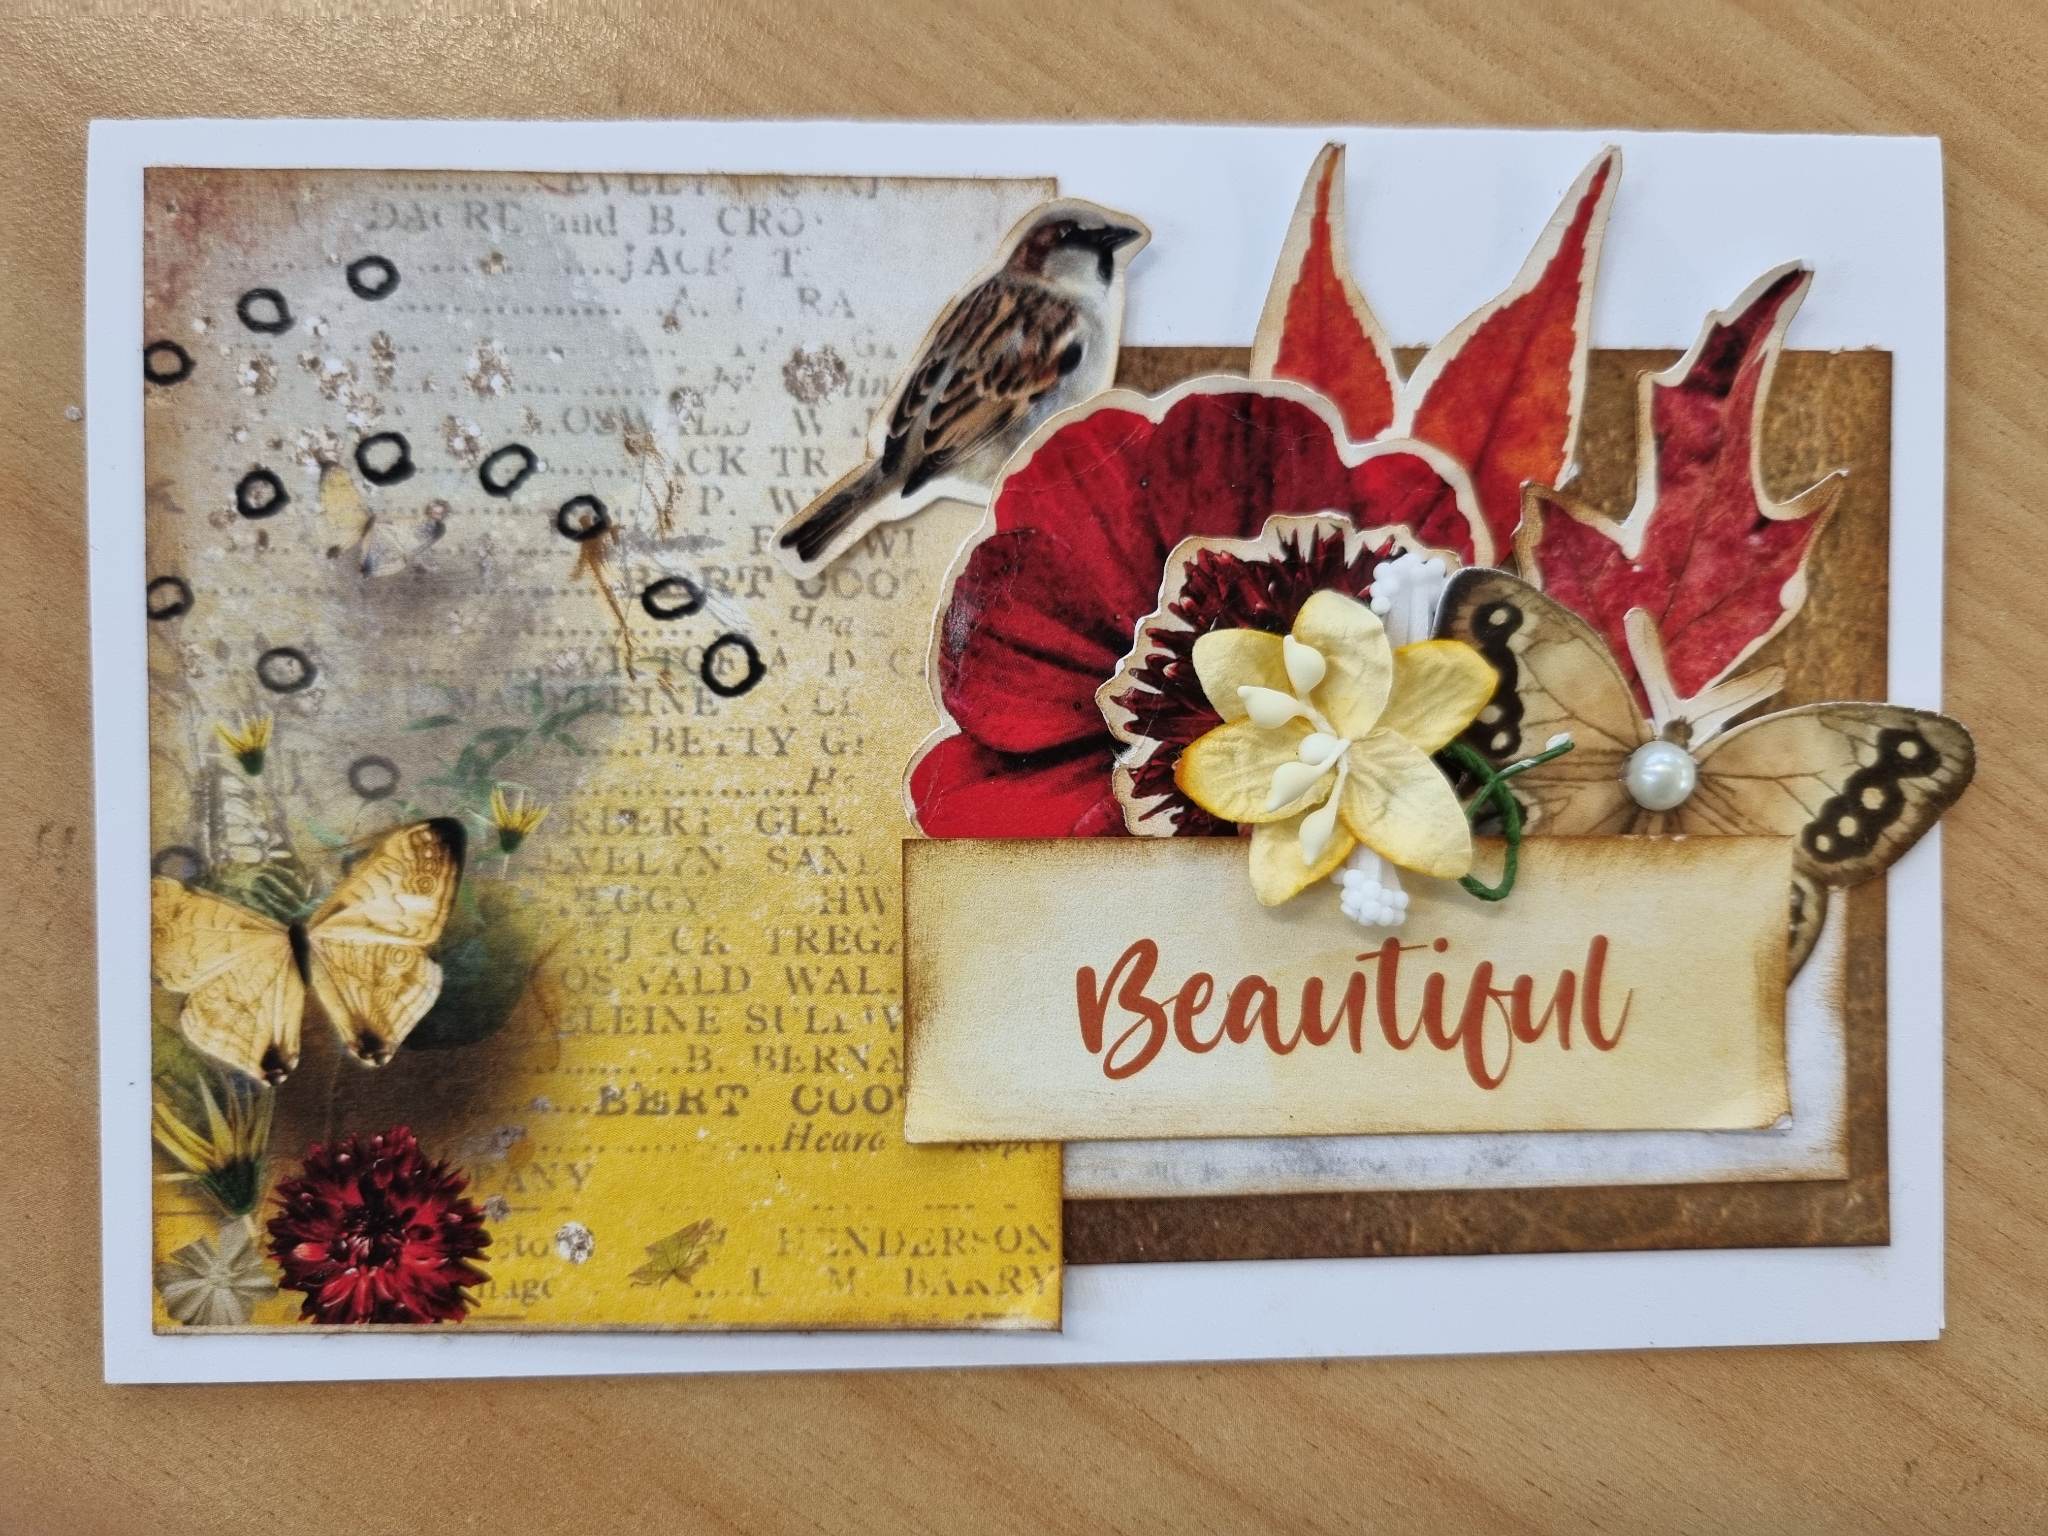 3Quarter Designs - Card Collection - Autumn Butterfly